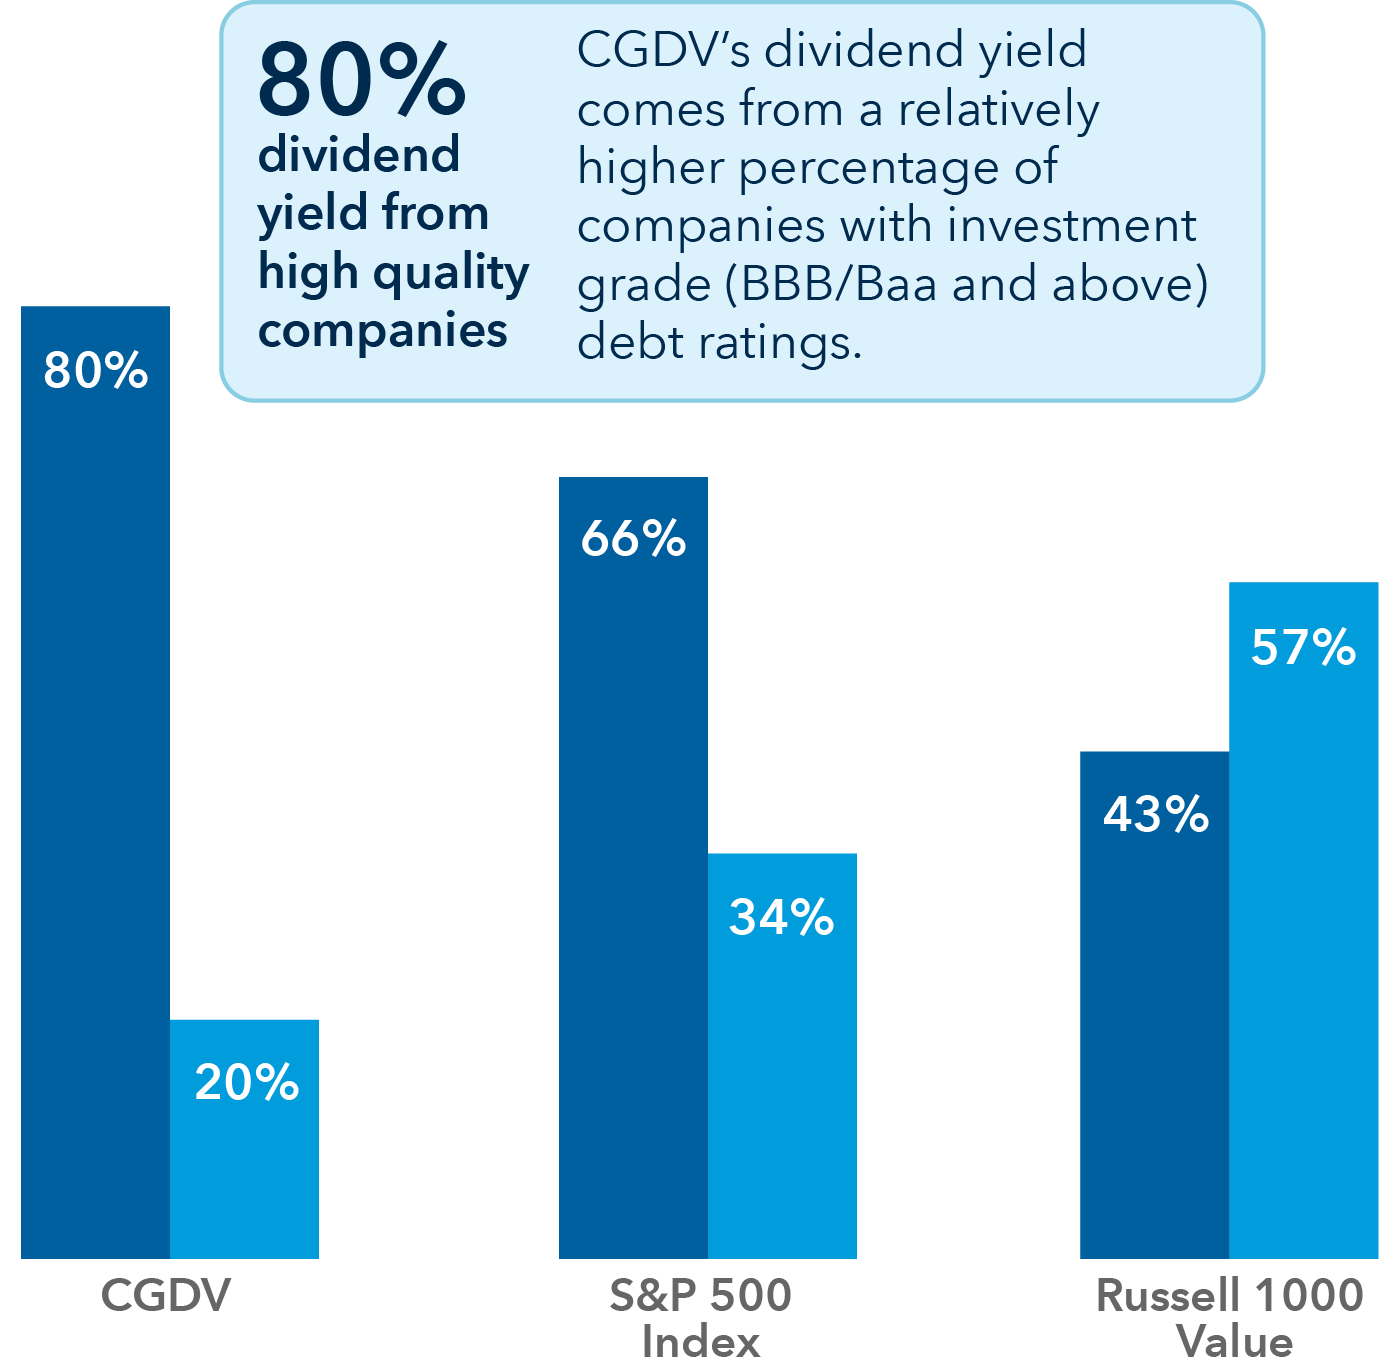 Visual shows a bar chart with three pairs of vertical bars, one navy blue and one sky blue. The navy blue bars represent high-quality (that is, the companies contributing the dividends have an investment-grade debt rating, defined as BBB/Baa and above), and the sky blue portion represents low quality or no rating.  There’s text within the chart that says, “80% dividend yield from high quality companies” and a separate section that says, “CGDV’s dividend yield comes from a relatively higher percentage of companies with investment grade (BBB/Baa and above) debt ratings.” The first bar represents the dividend composition of CGDV, which shows 80% of the dividend yield coming from high-quality companies and 20% from low-quality or unrated companies. The second bar represents the S&P 500 Index. 66% of its dividend yield comes from high-quality companies and 34% comes from low-quality or unrated companies. The third bar represents the Russell 1000 Value Index. 43% of its dividend yield comes from high-quality companies and 57% comes from low-quality or unrated companies. 